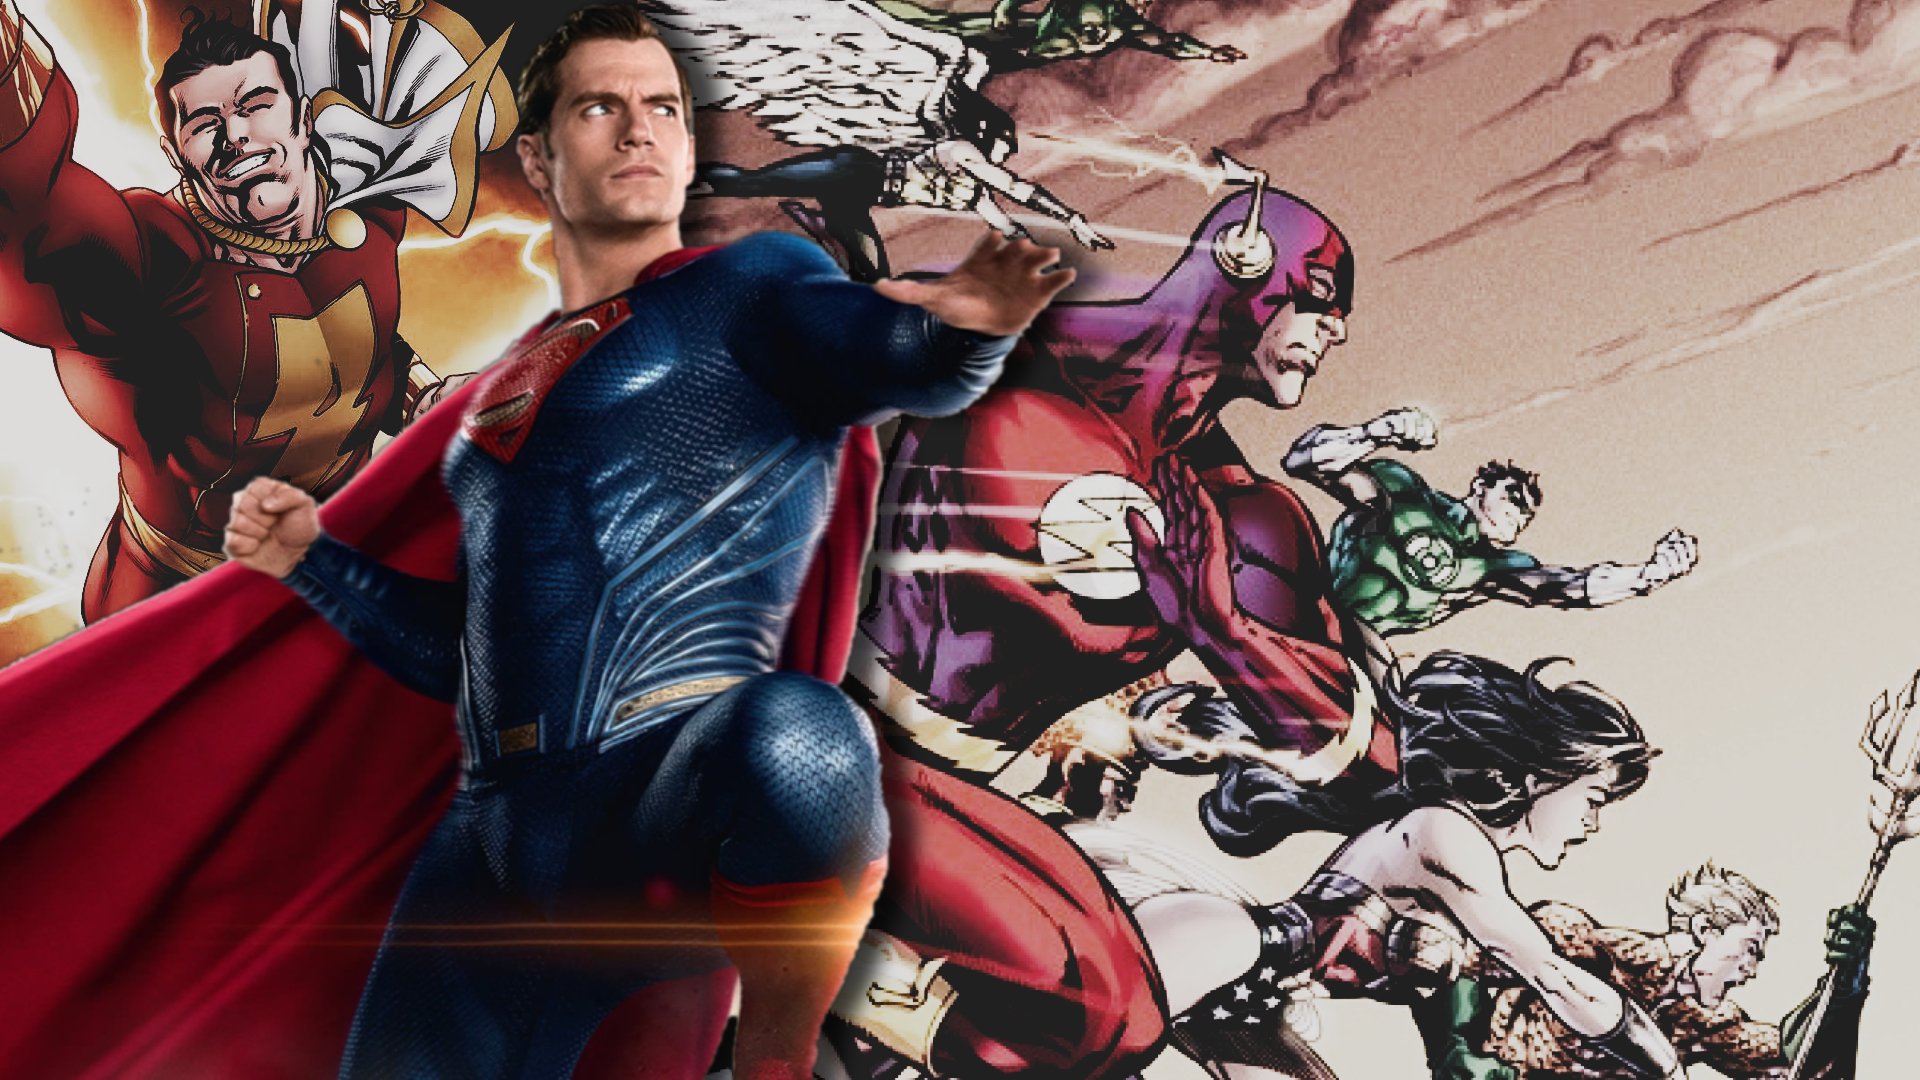 Henry Cavill Reportedly in Another 2023 DC Movie Apart From The Flash,  Could be 'Aquaman 2' or 'Shazam! Fury of the Gods' - FandomWire